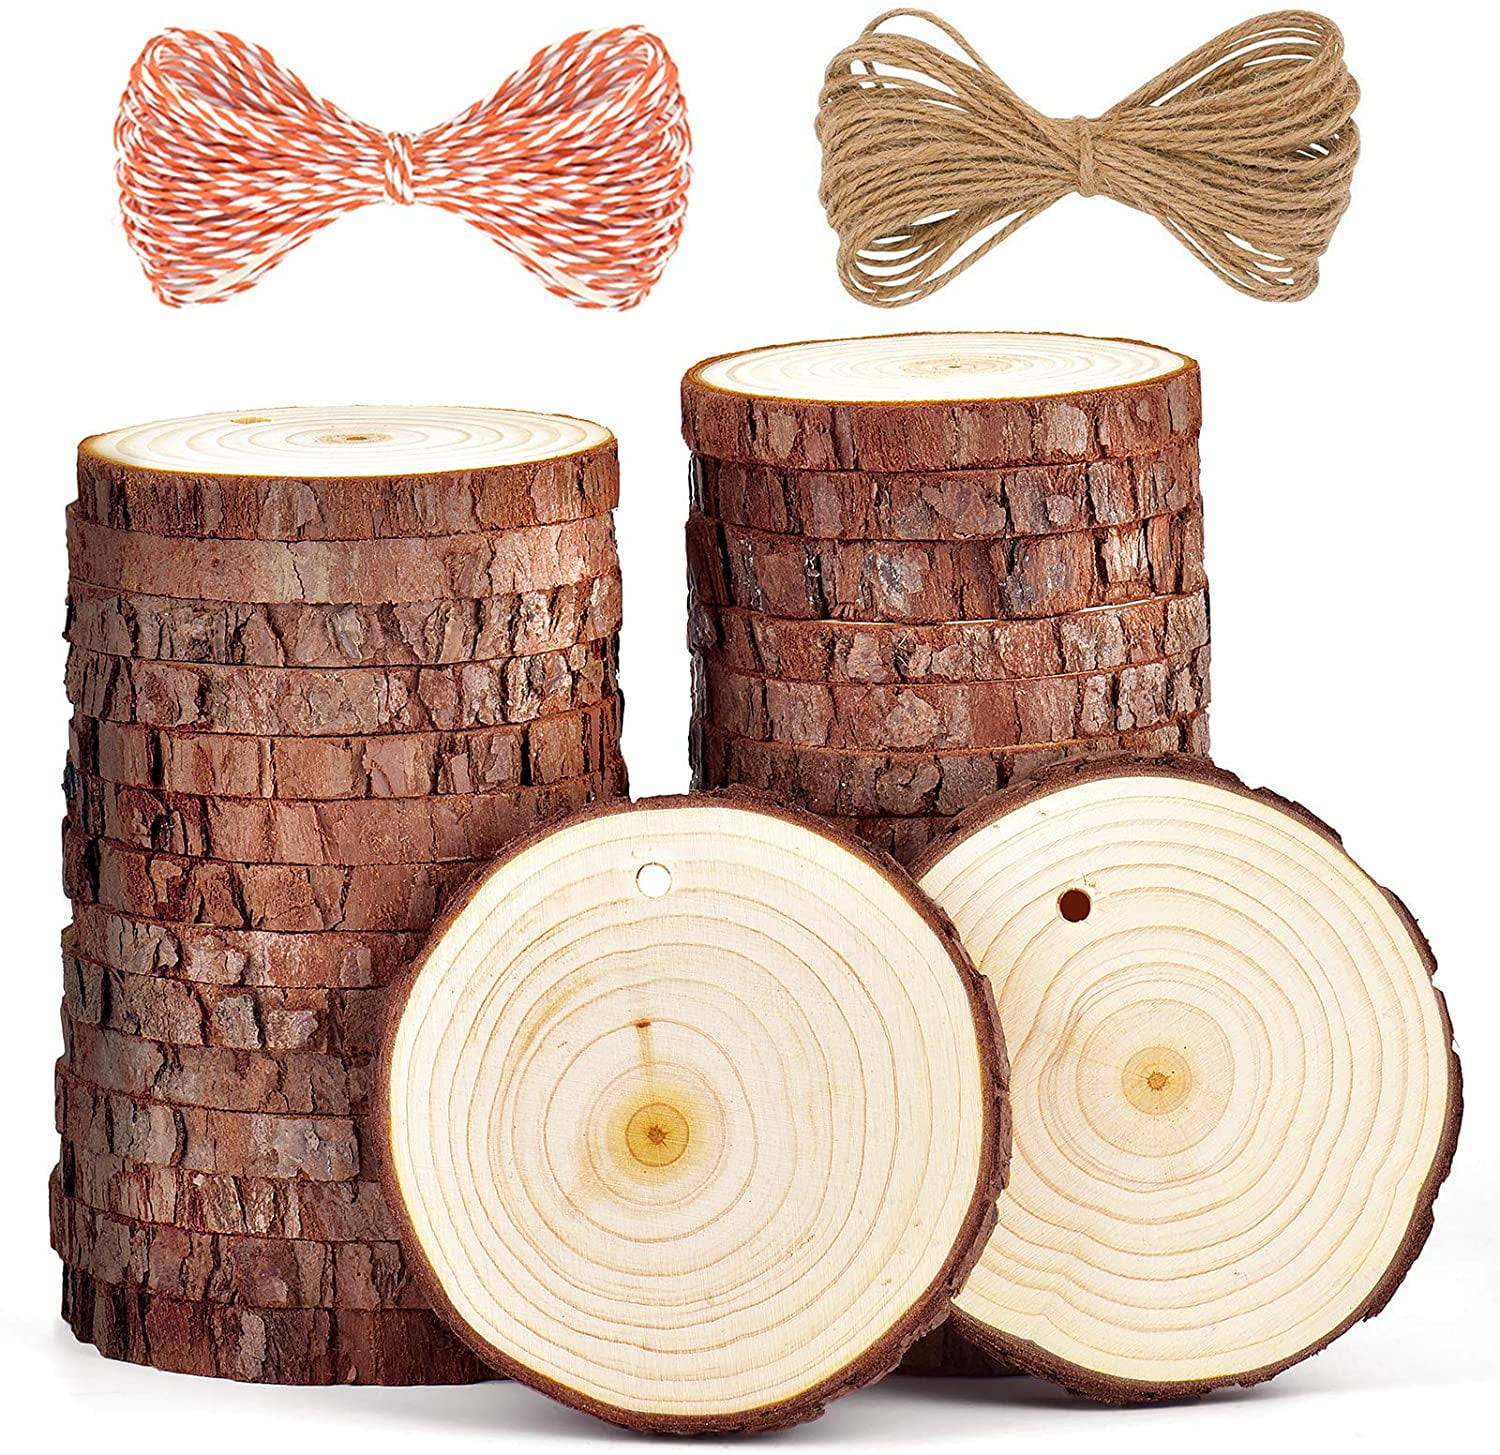  Large Unfinished Wood Slices for Centerpieces 1 pcs 12-13  inches Natural Wood centerpieces for Tables Table Decor, Rustic Wedding  Centerpieces， Wood Rounds for Crafts, andwood Circles Discs